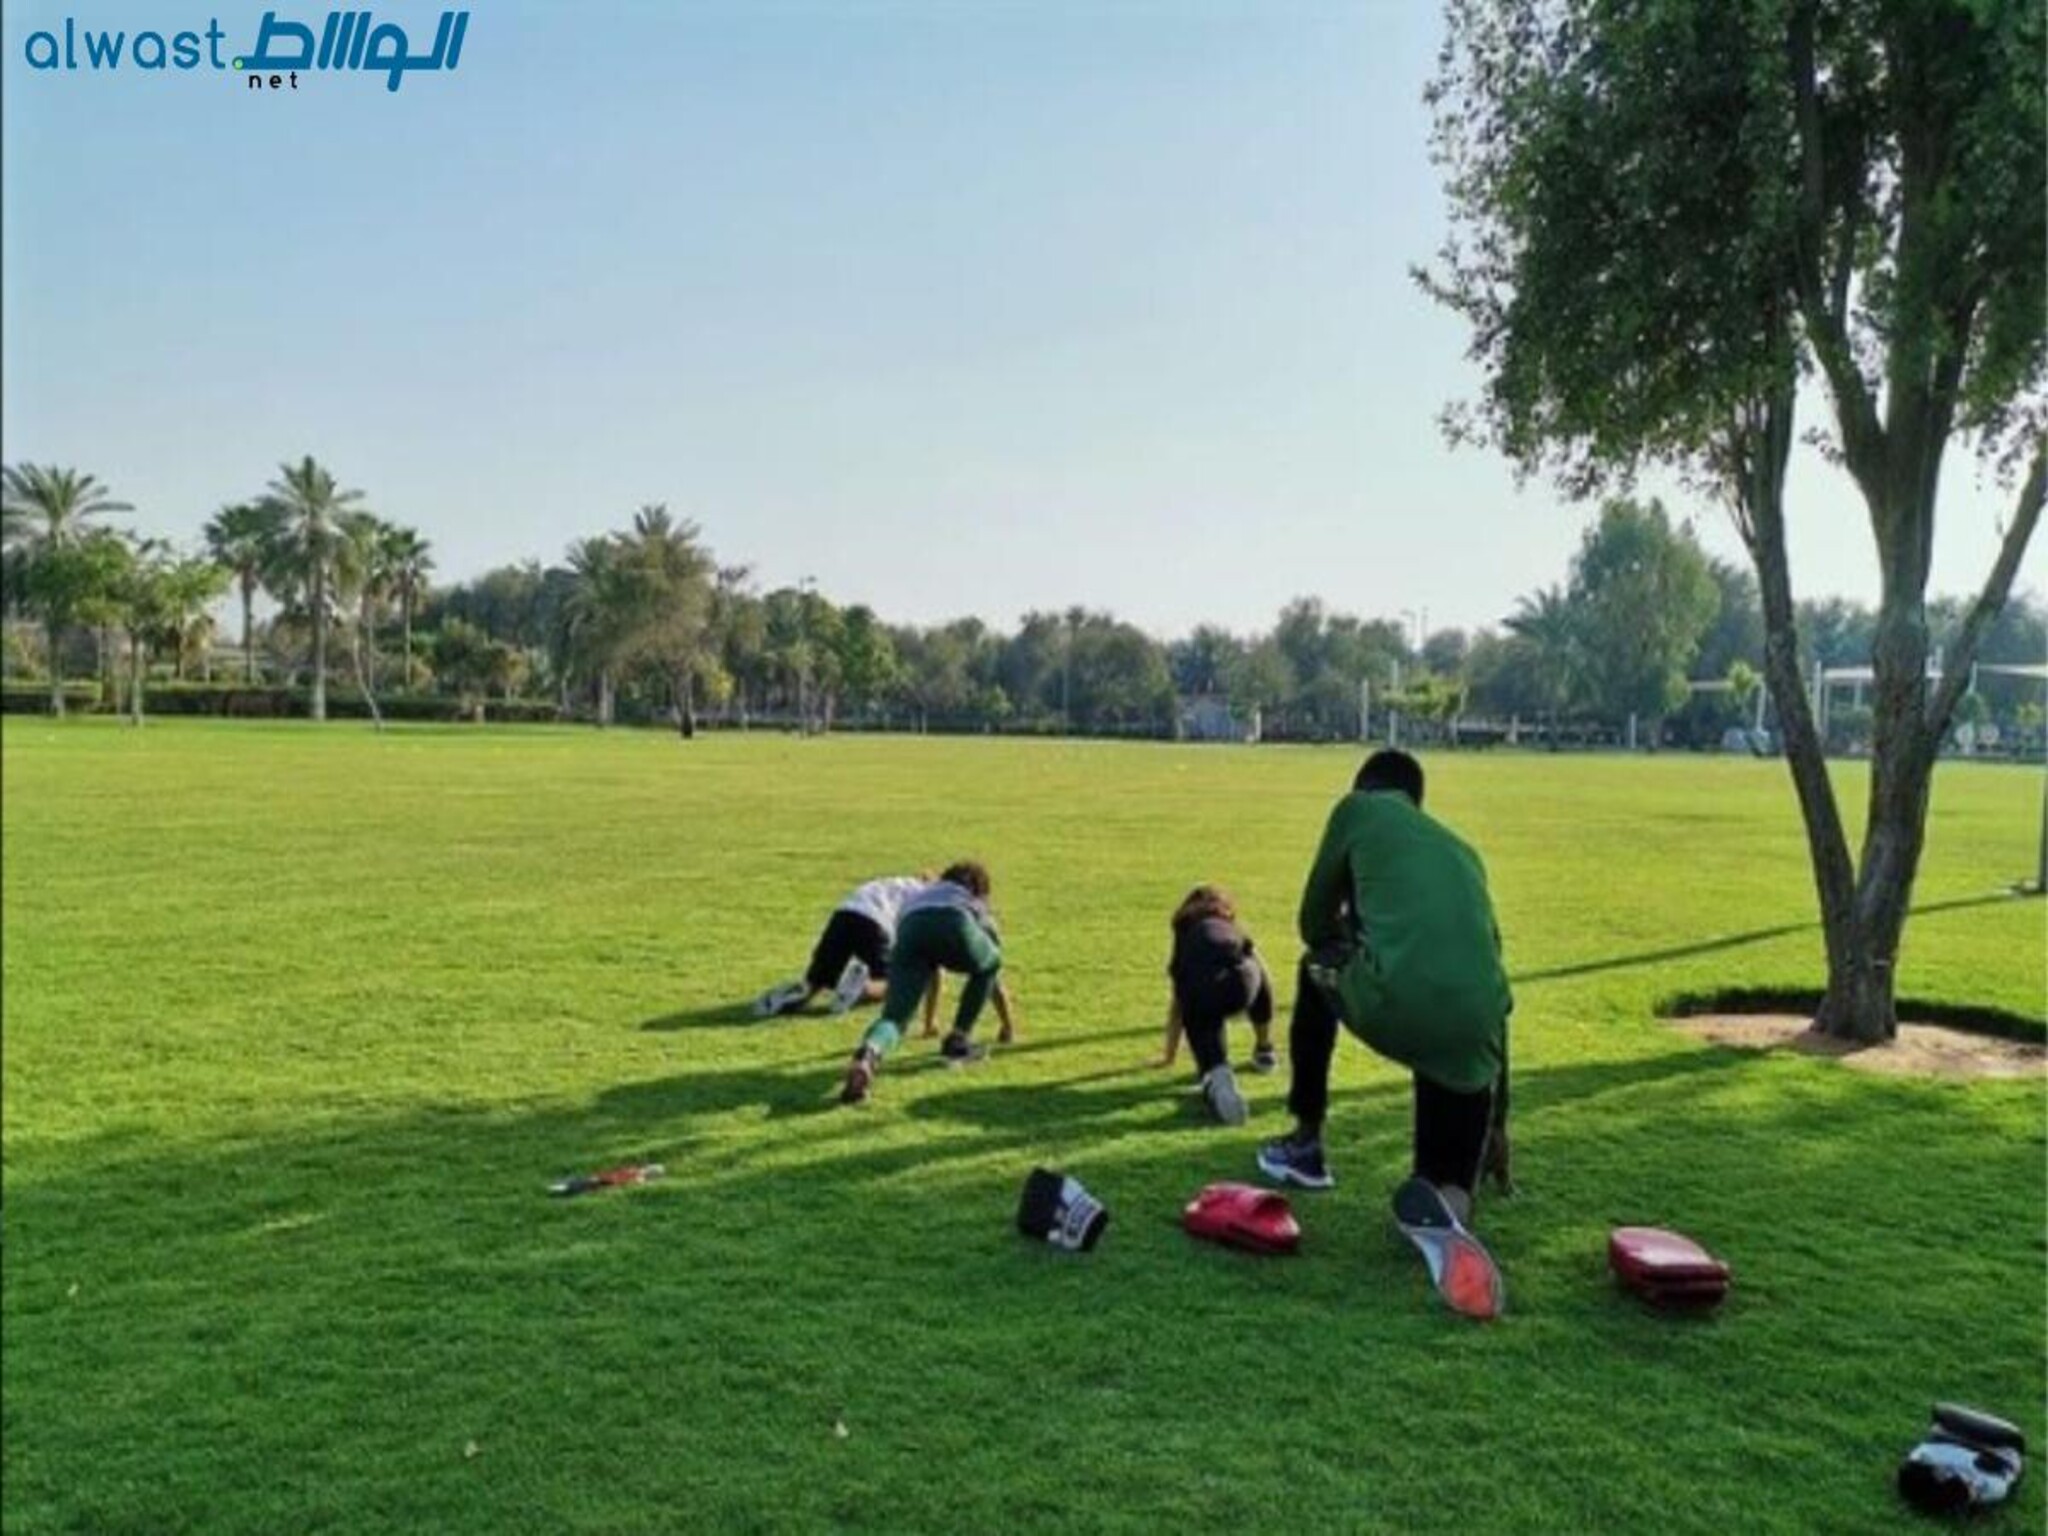 Dubai Authority to build 30 new parks in the next year